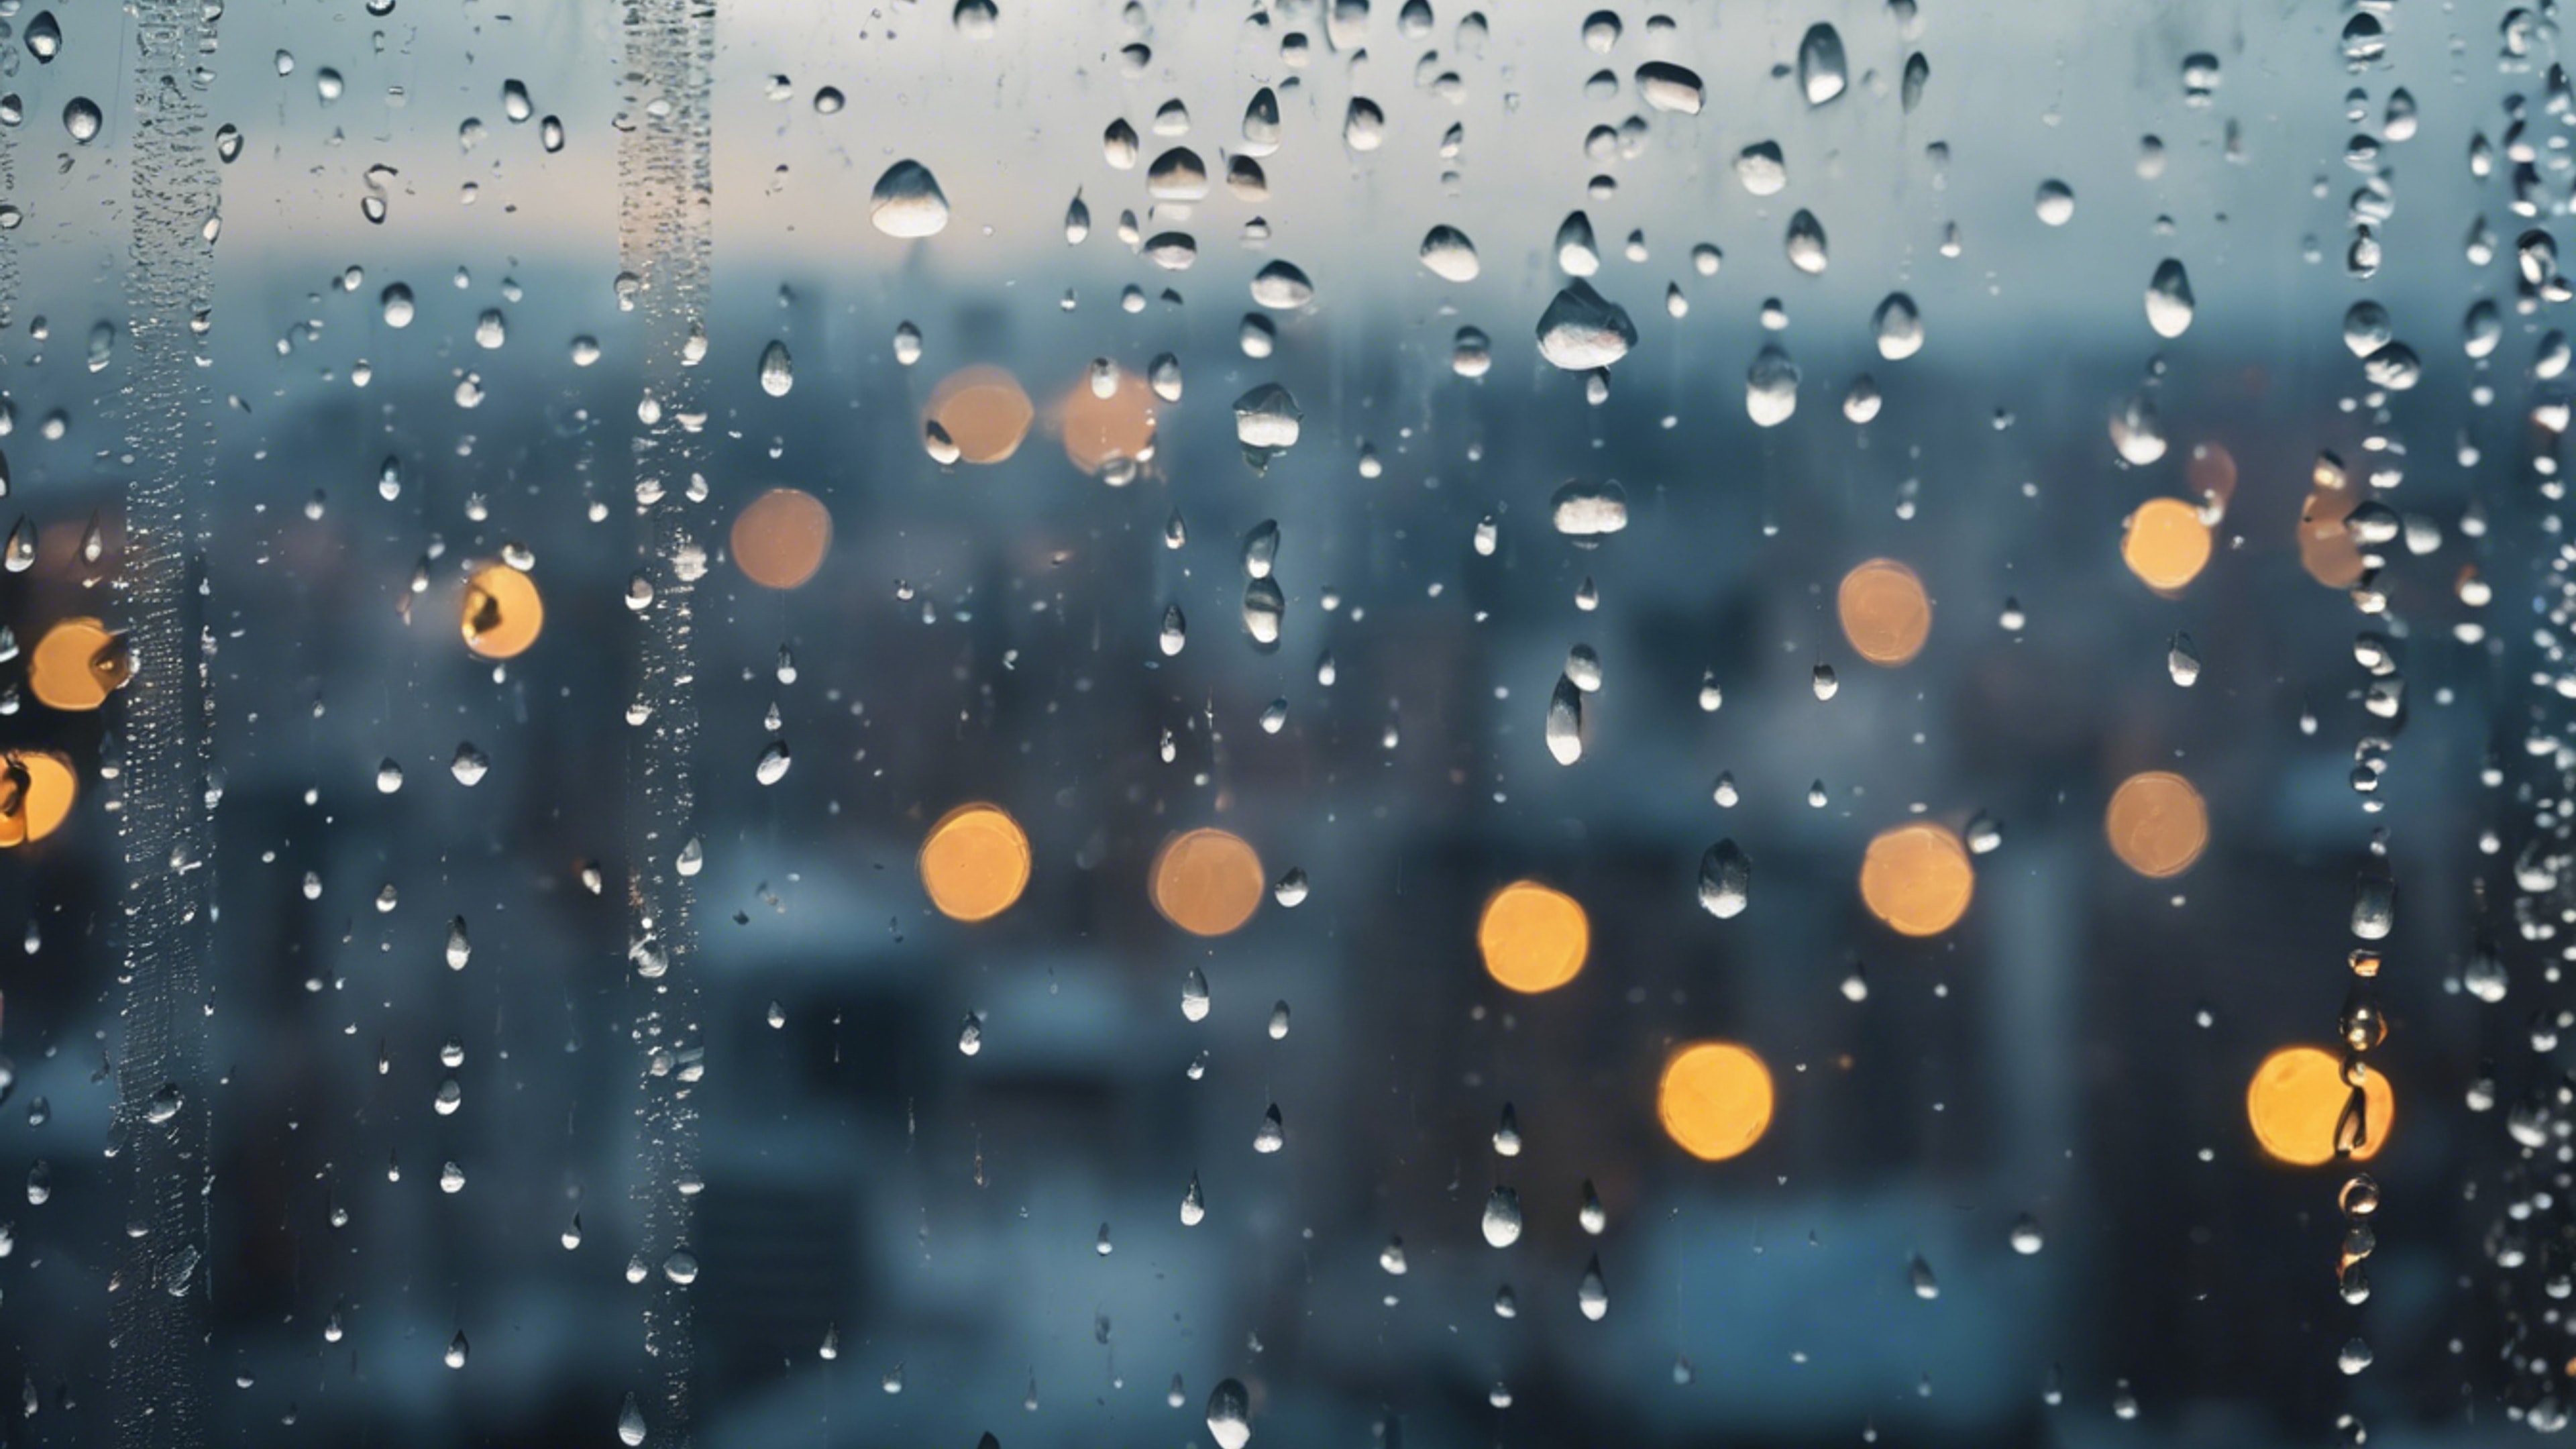 Close-up of raindrops streaming down a window pane, with a blurry cityscape in the background. Tapéta[d0f87e7319714e23a96f]